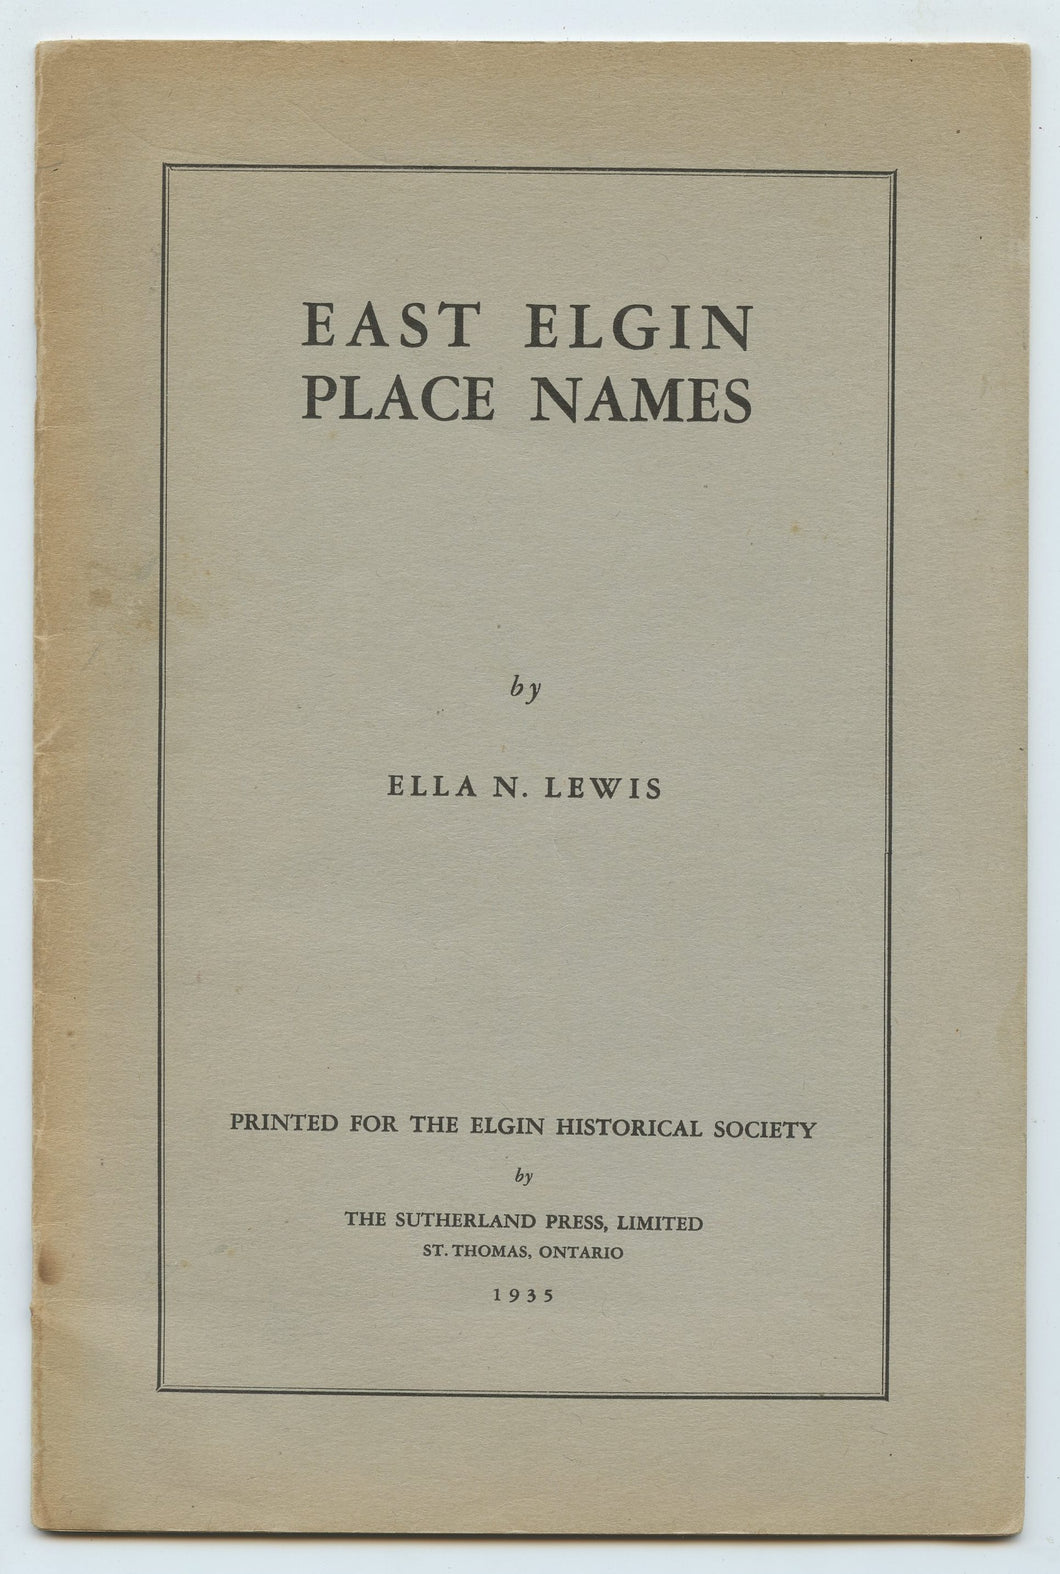 East Elgin Place Names